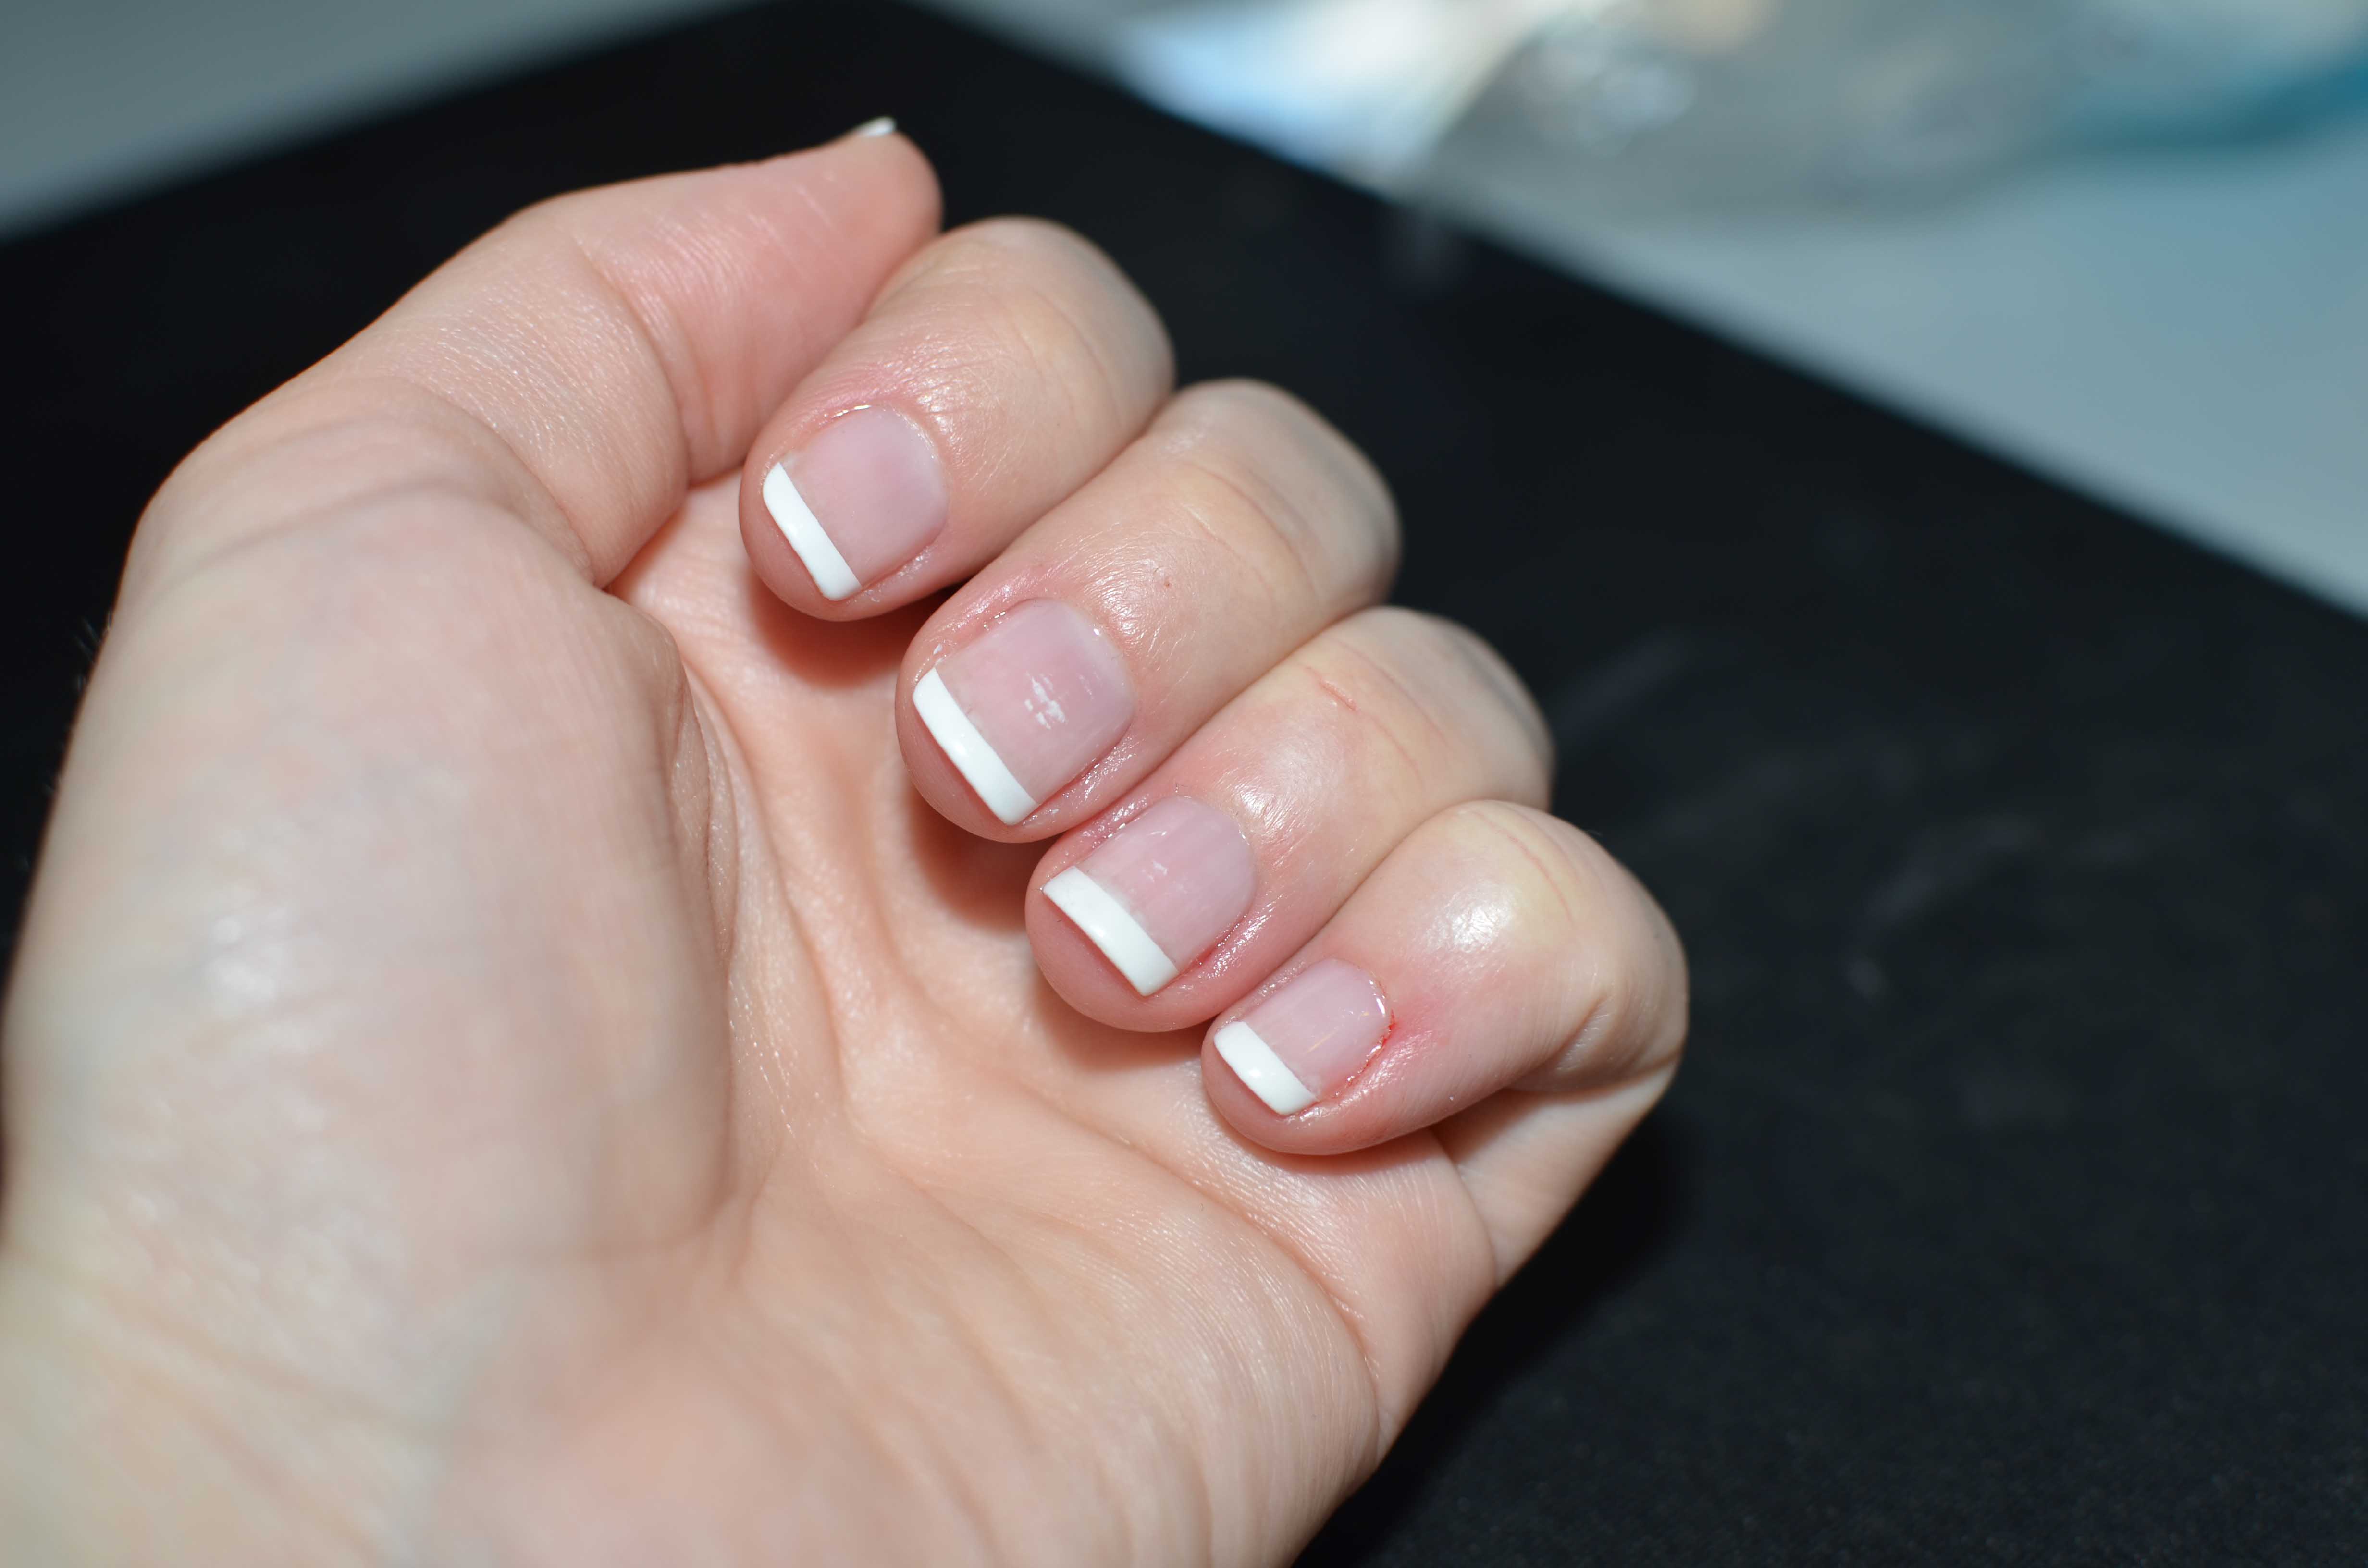 6. Retro French Tip Gel Nails - wide 7